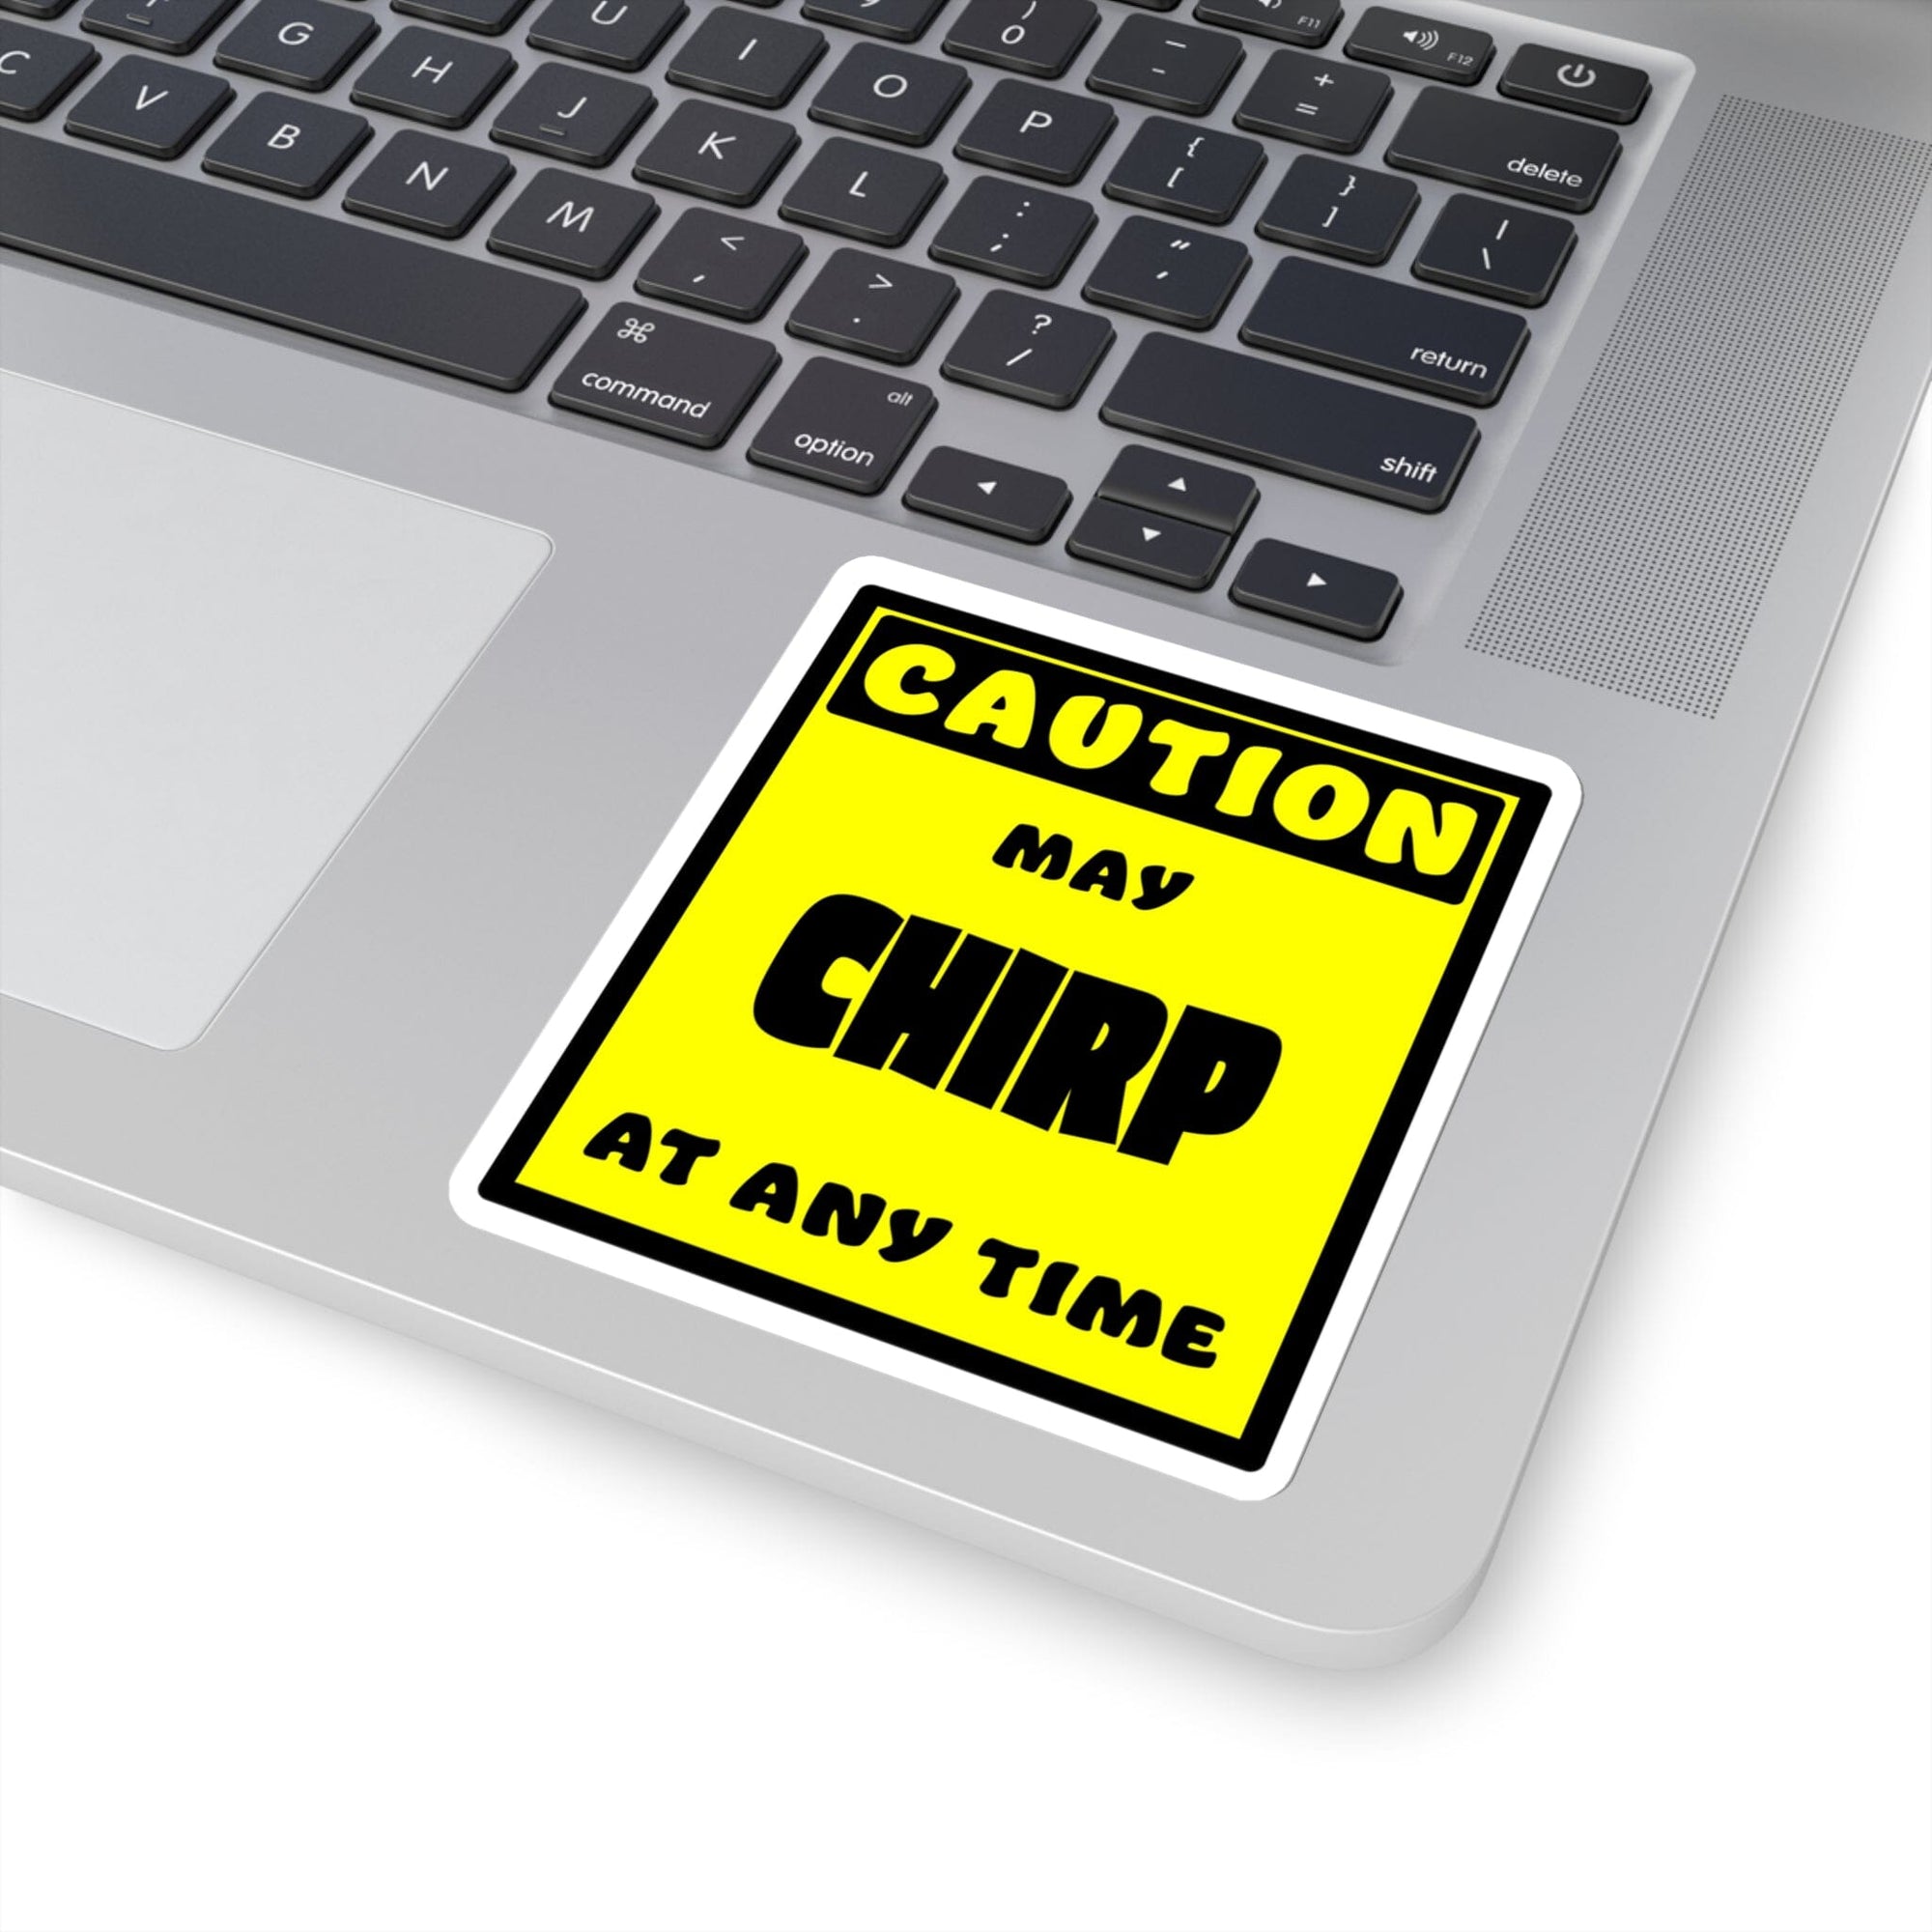 CAUTION! May CHIRP at any time! - Sticker Sticker AFLT-Whootorca 